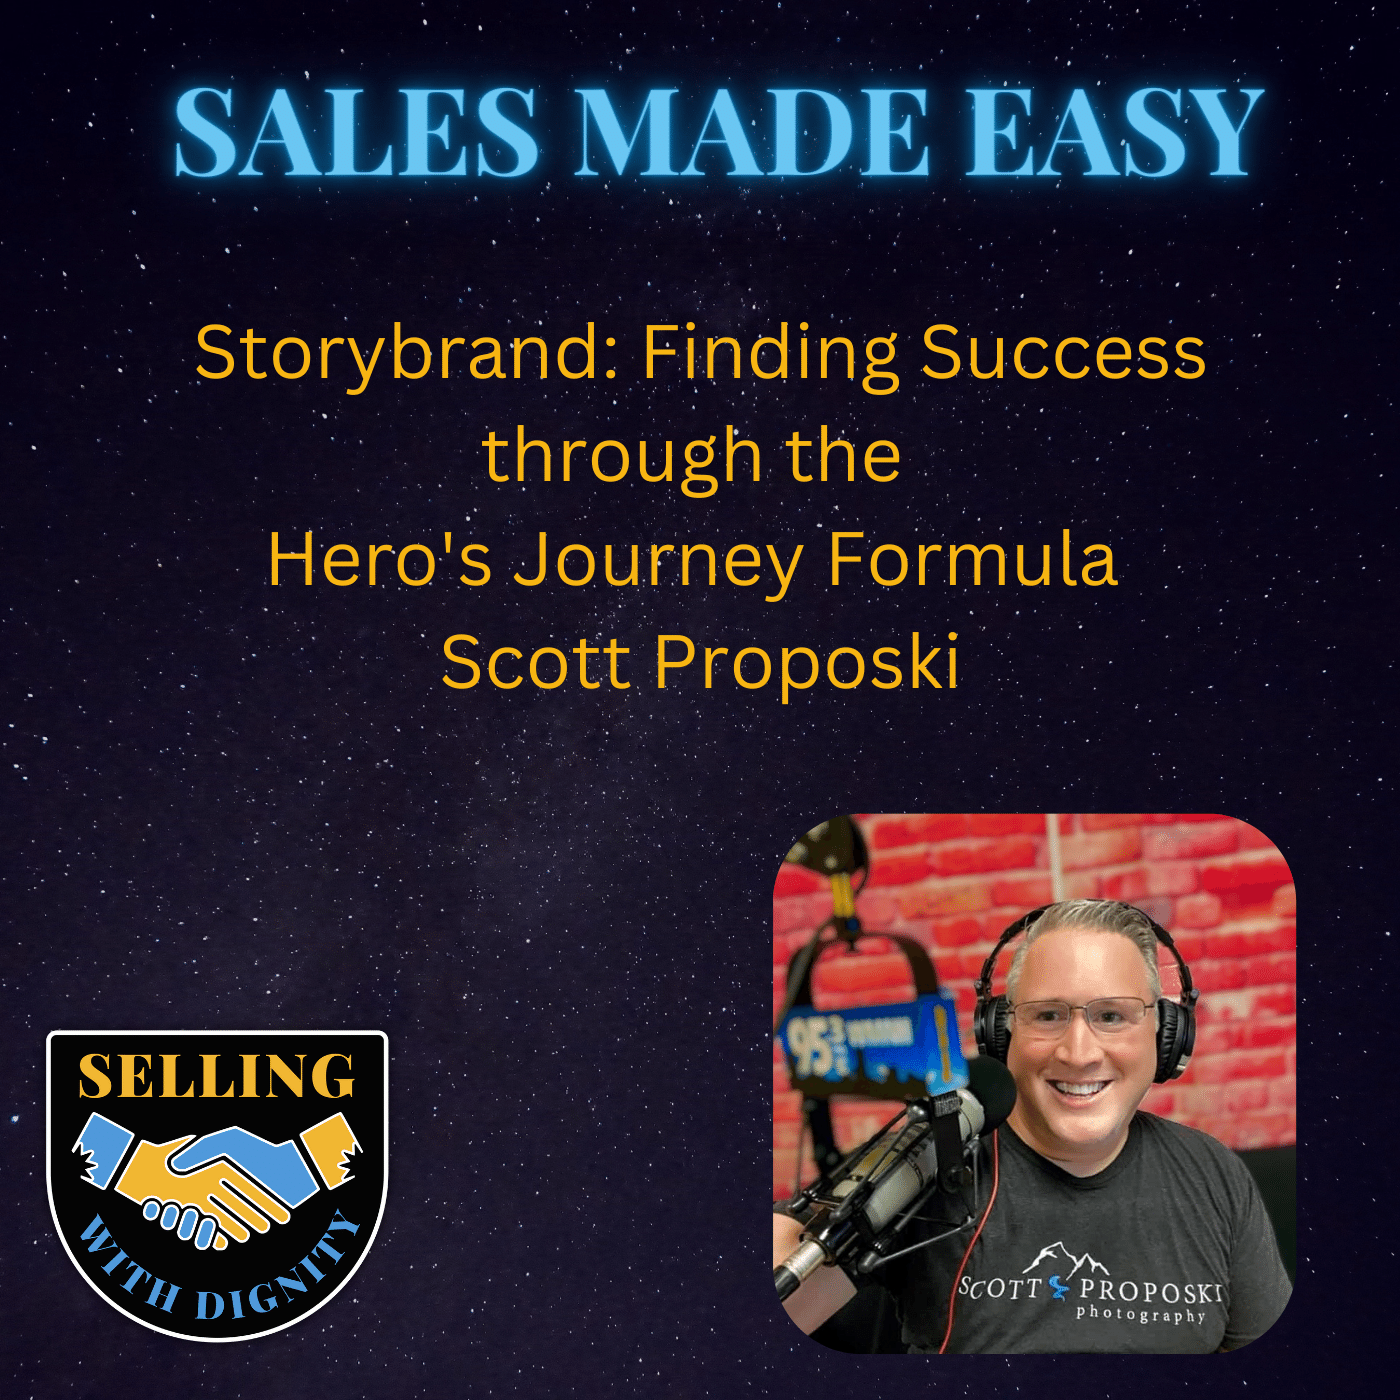 Storybrand: Finding Success through the Hero’s Journey Formula with Scott Proposki